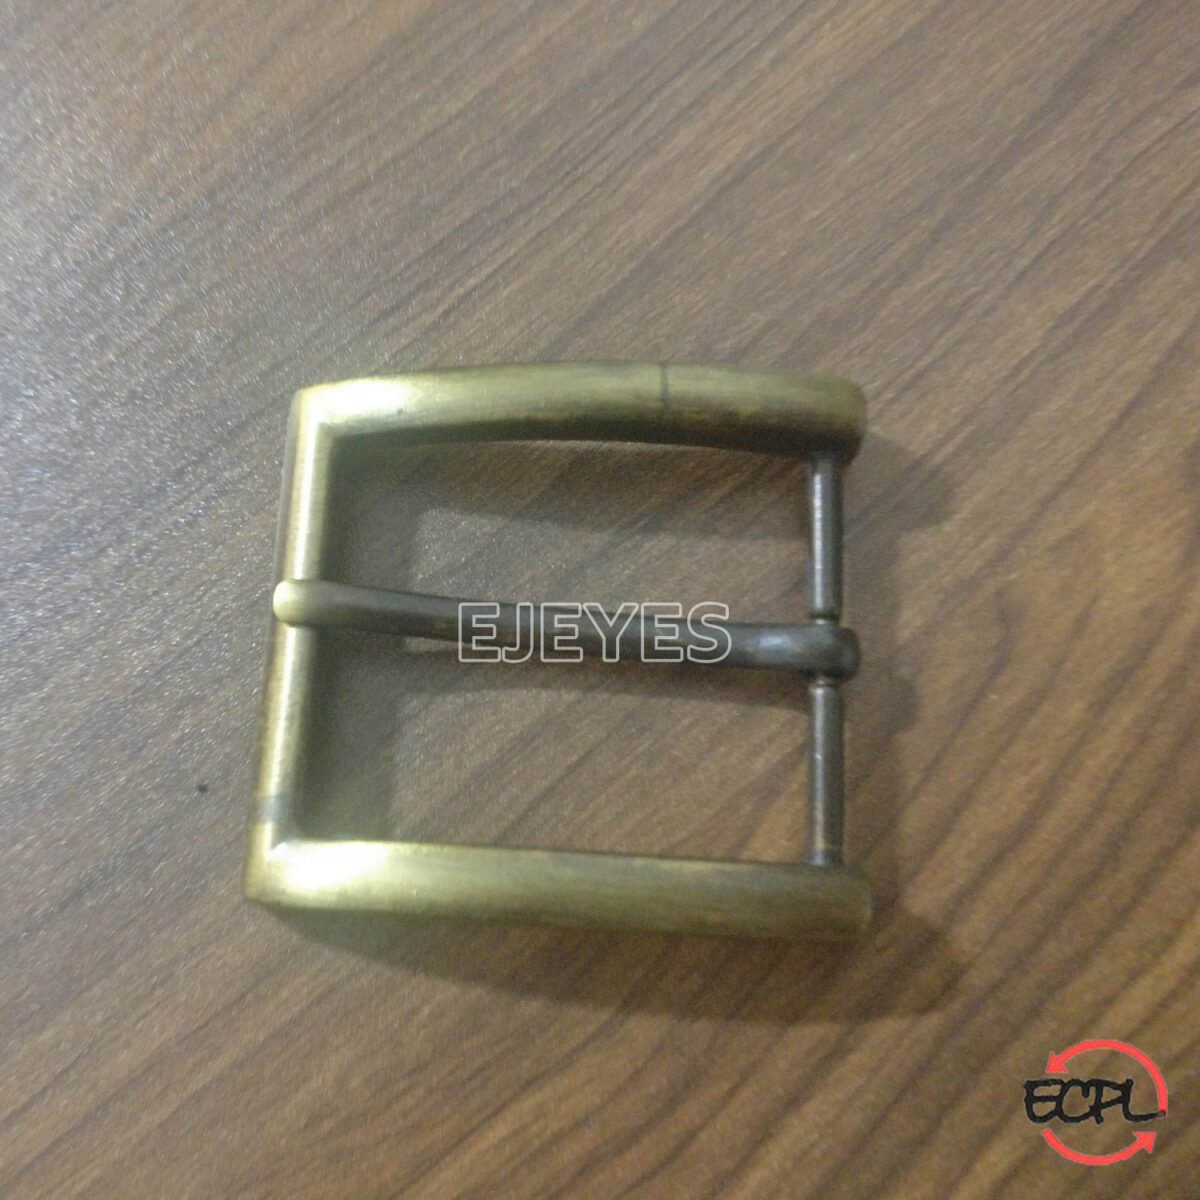 We manufacture & supply high quality 40mm Belt Buckle Antique suitable for Belts and Buckles applications. ‘Falcon by Ejeyes’ Square Buckles are made of best grade and quality material sourced directly from renowned material suppliers and available in various finishes and sizes as per customer requirement.